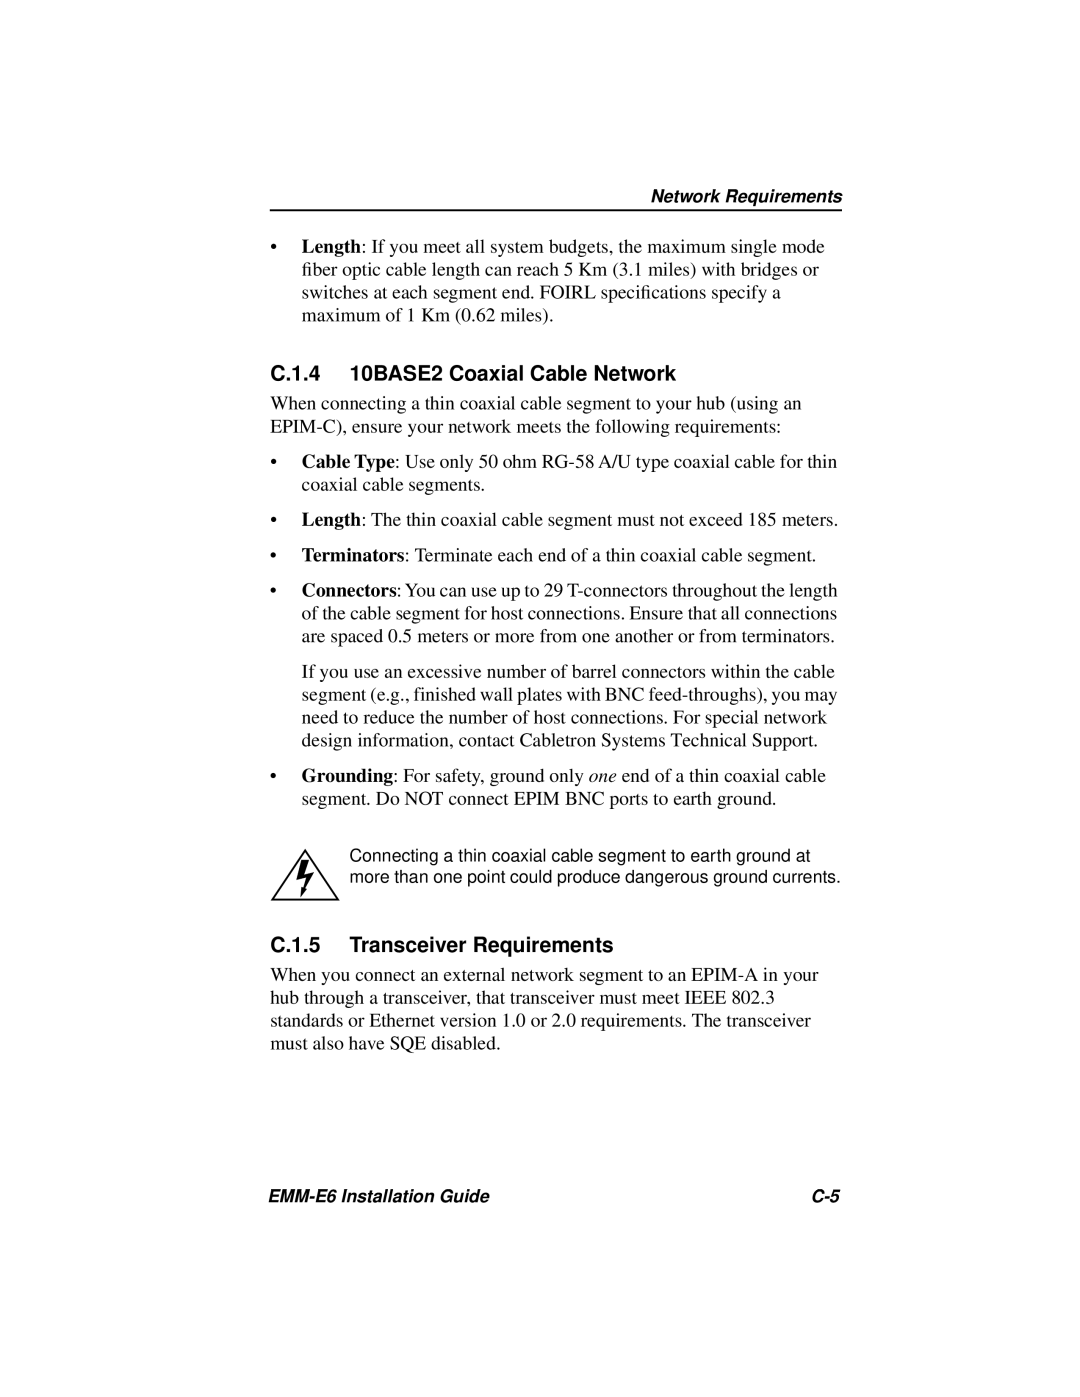 Cabletron Systems EMM-E6 manual C.1.4 10BASE2 Coaxial Cable Network, C.1.5 Transceiver Requirements 